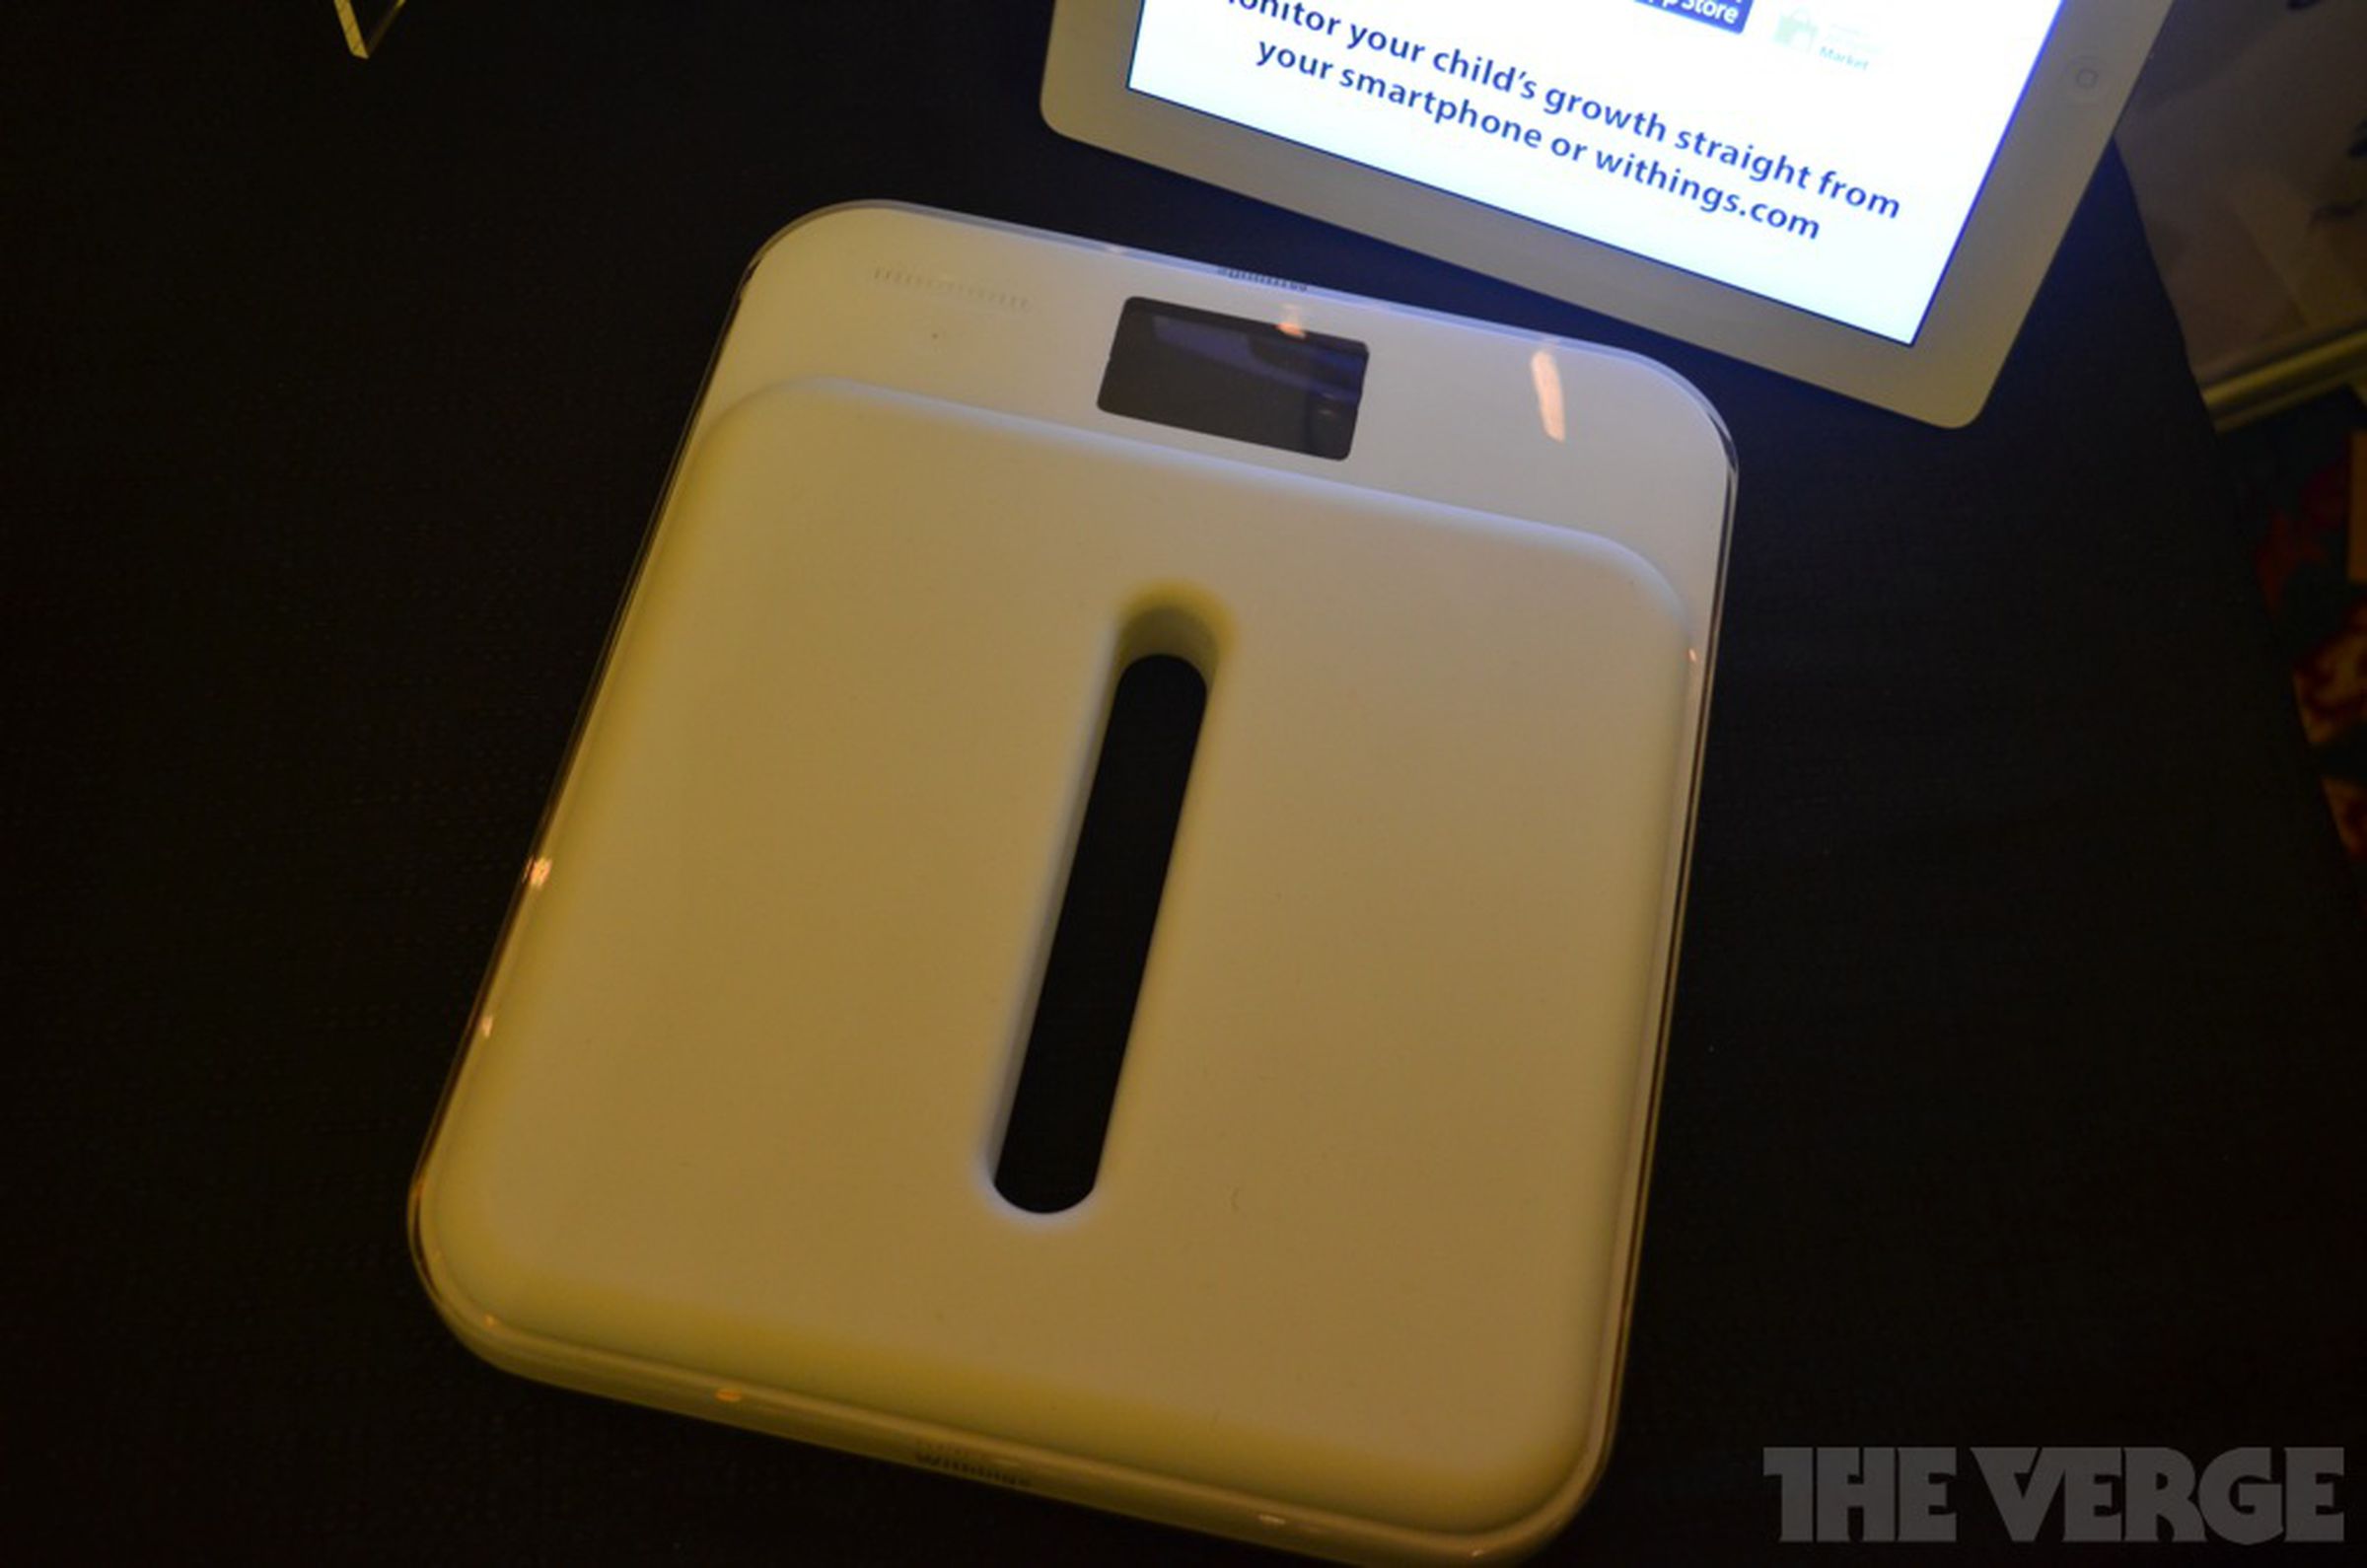 Withings Smart Baby Scale hands-on pictures